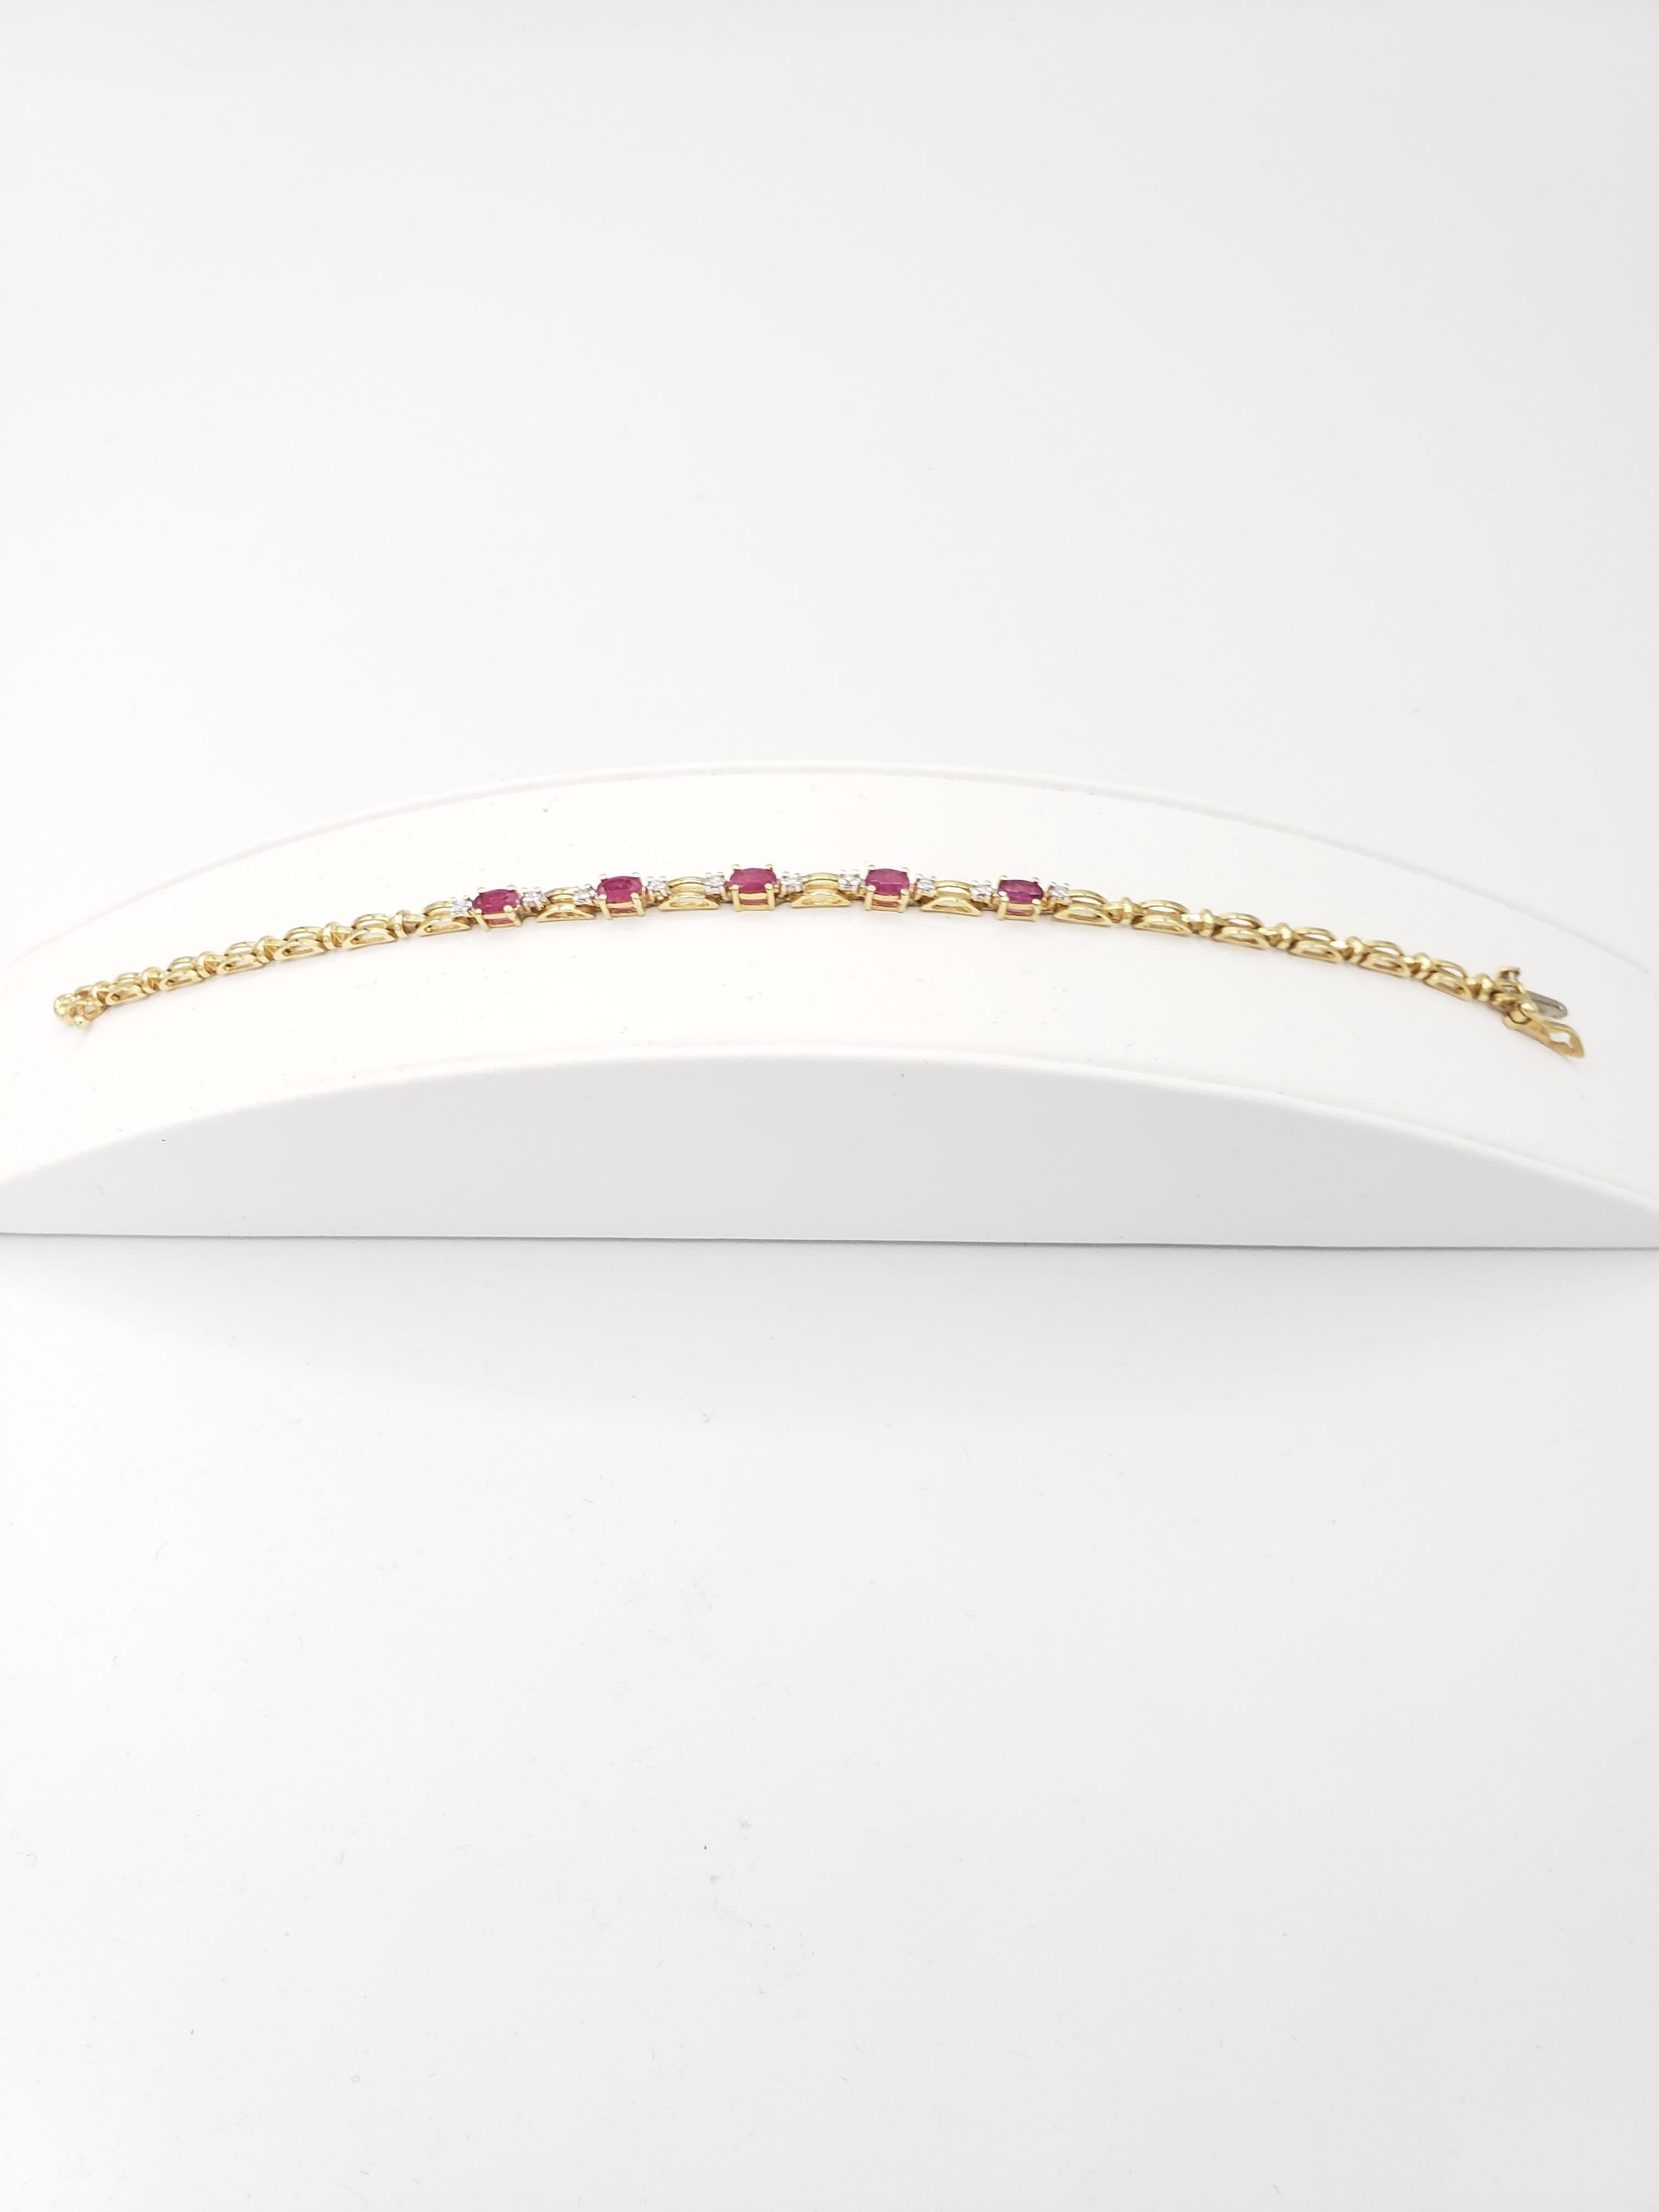 This stunning tennis bracelet is a true gem. Crafted with 14k solid yellow gold, it features natural rubies and diamonds that shine brilliantly with every movement. The length of the bracelet is 7 3/8 inches.

The beautiful yellow gold complements